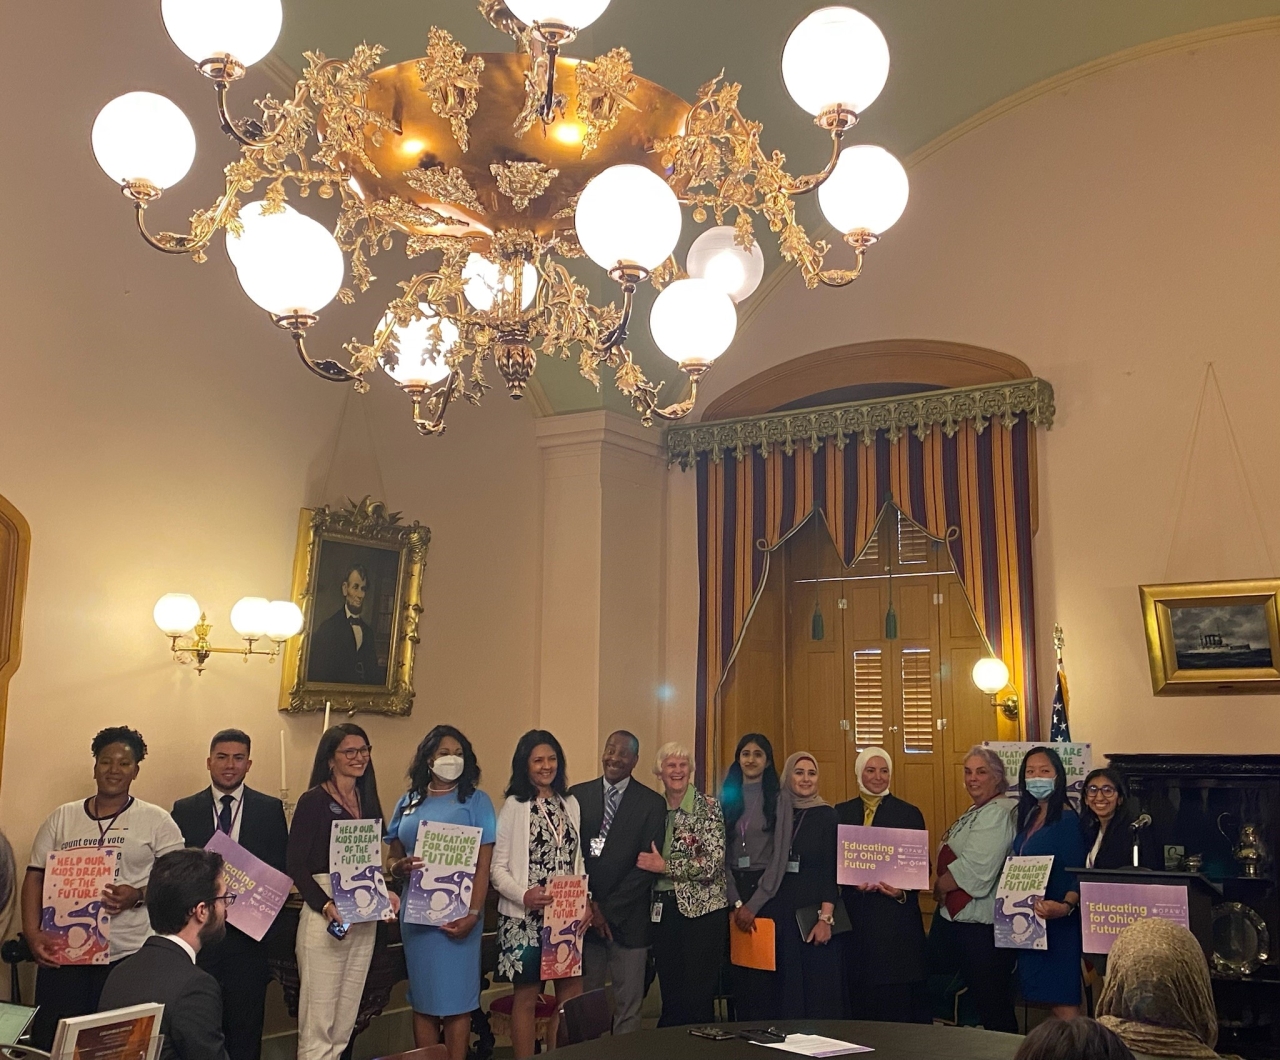 Rep. Somani attends a press conference to support the introduction of House Bill 171, adding Asian American studies into Social Studies curriculum.